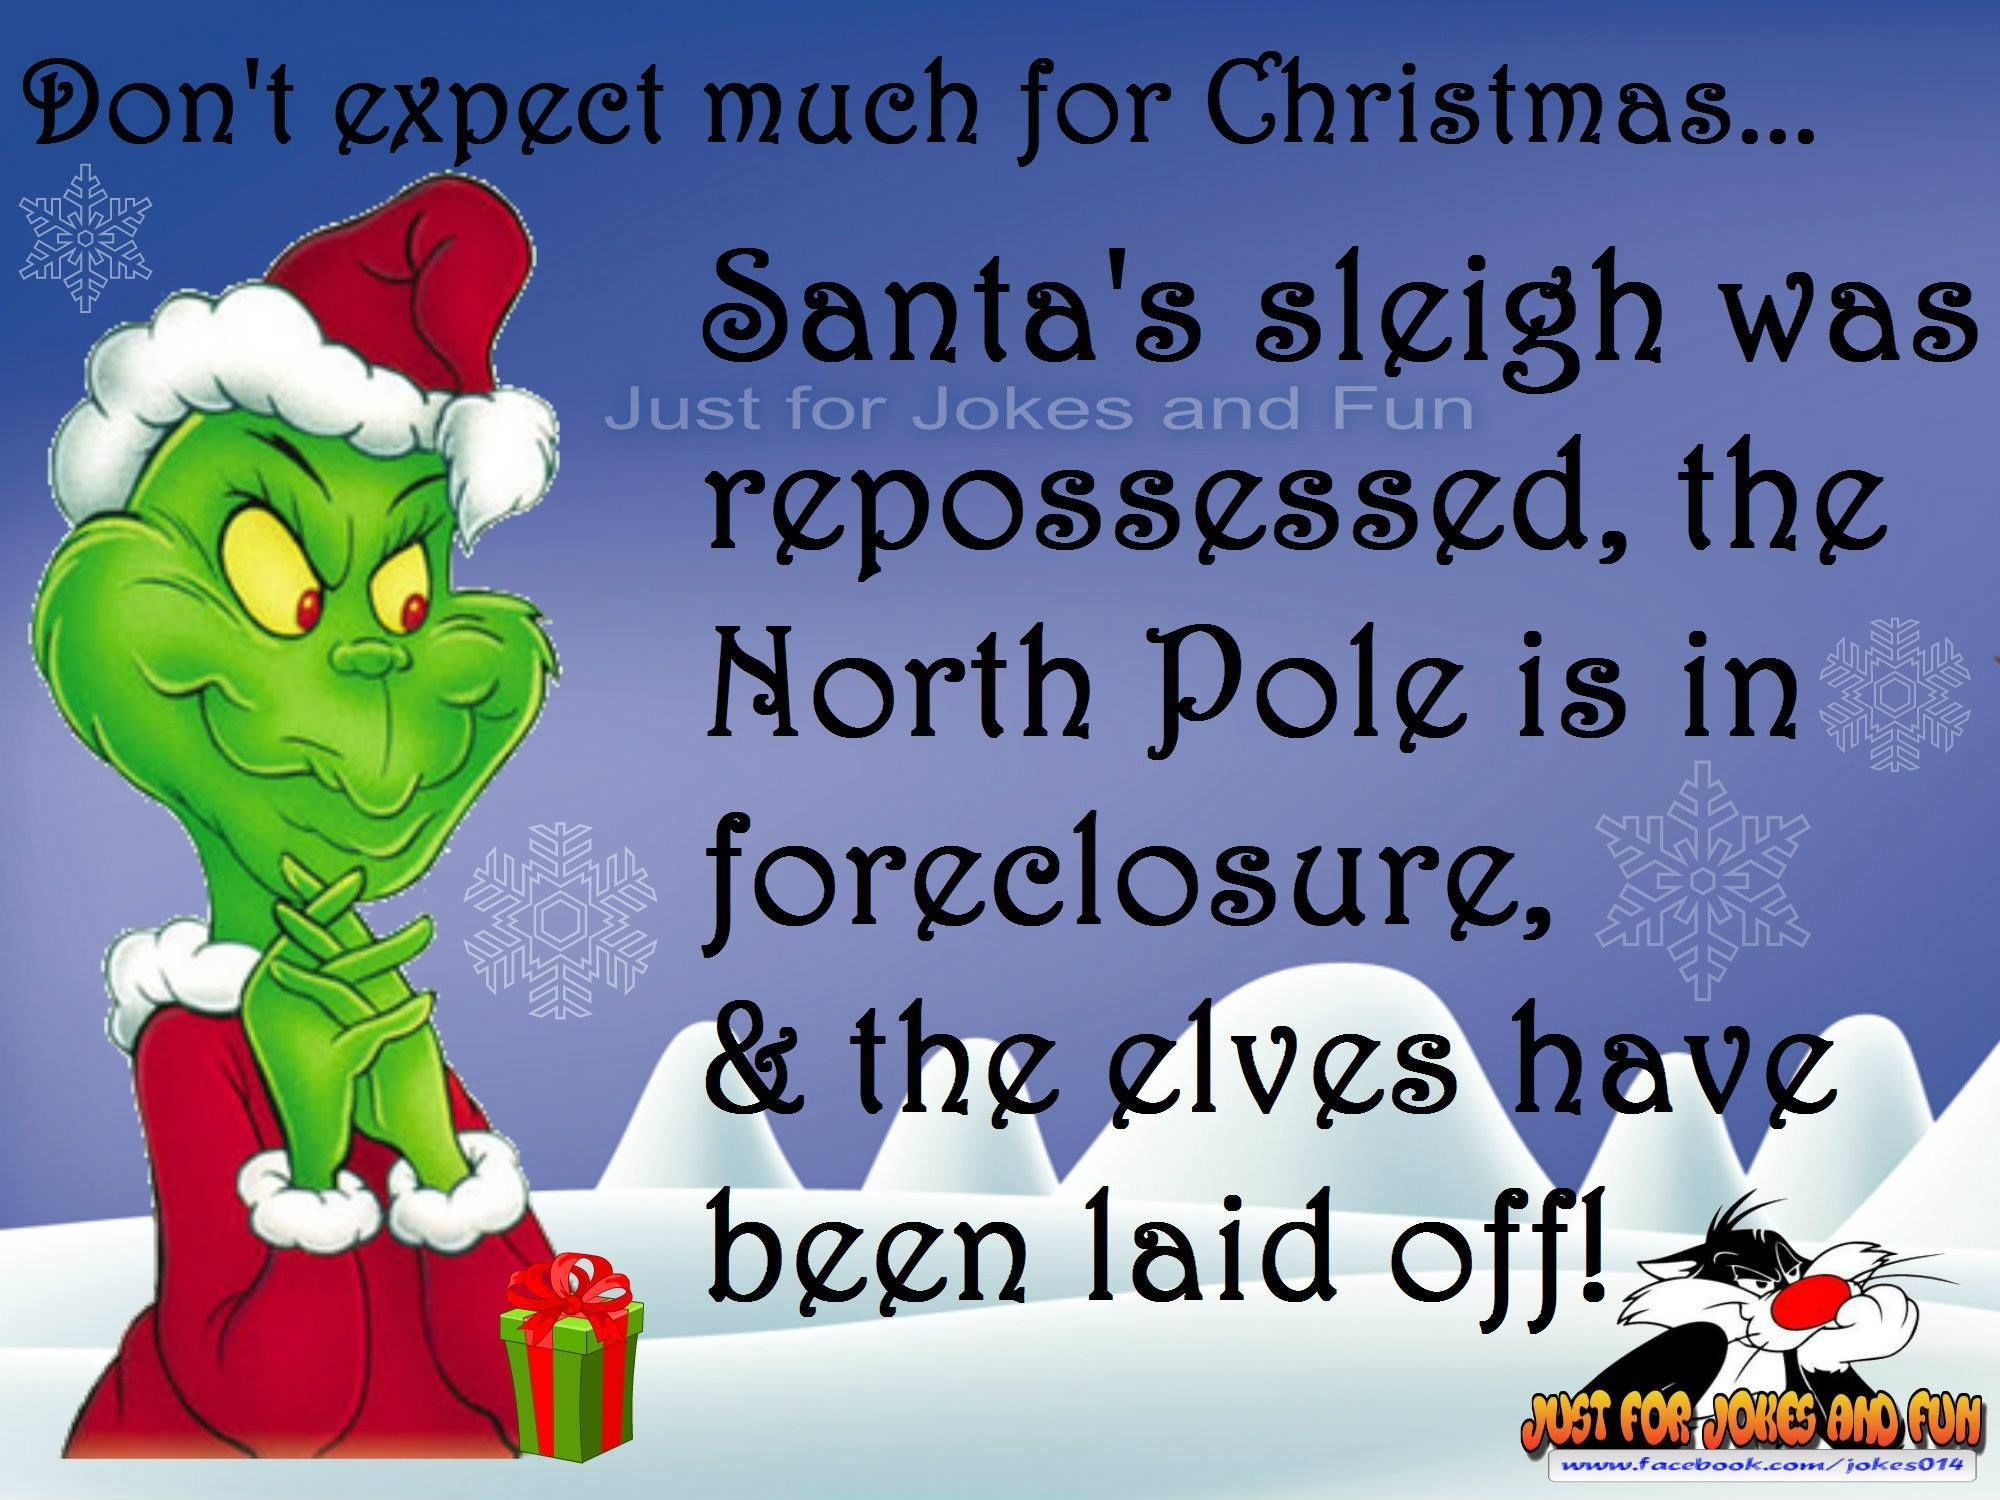 Humorous Christmas Quote
 Funny Christmas Quote With The Grinch s